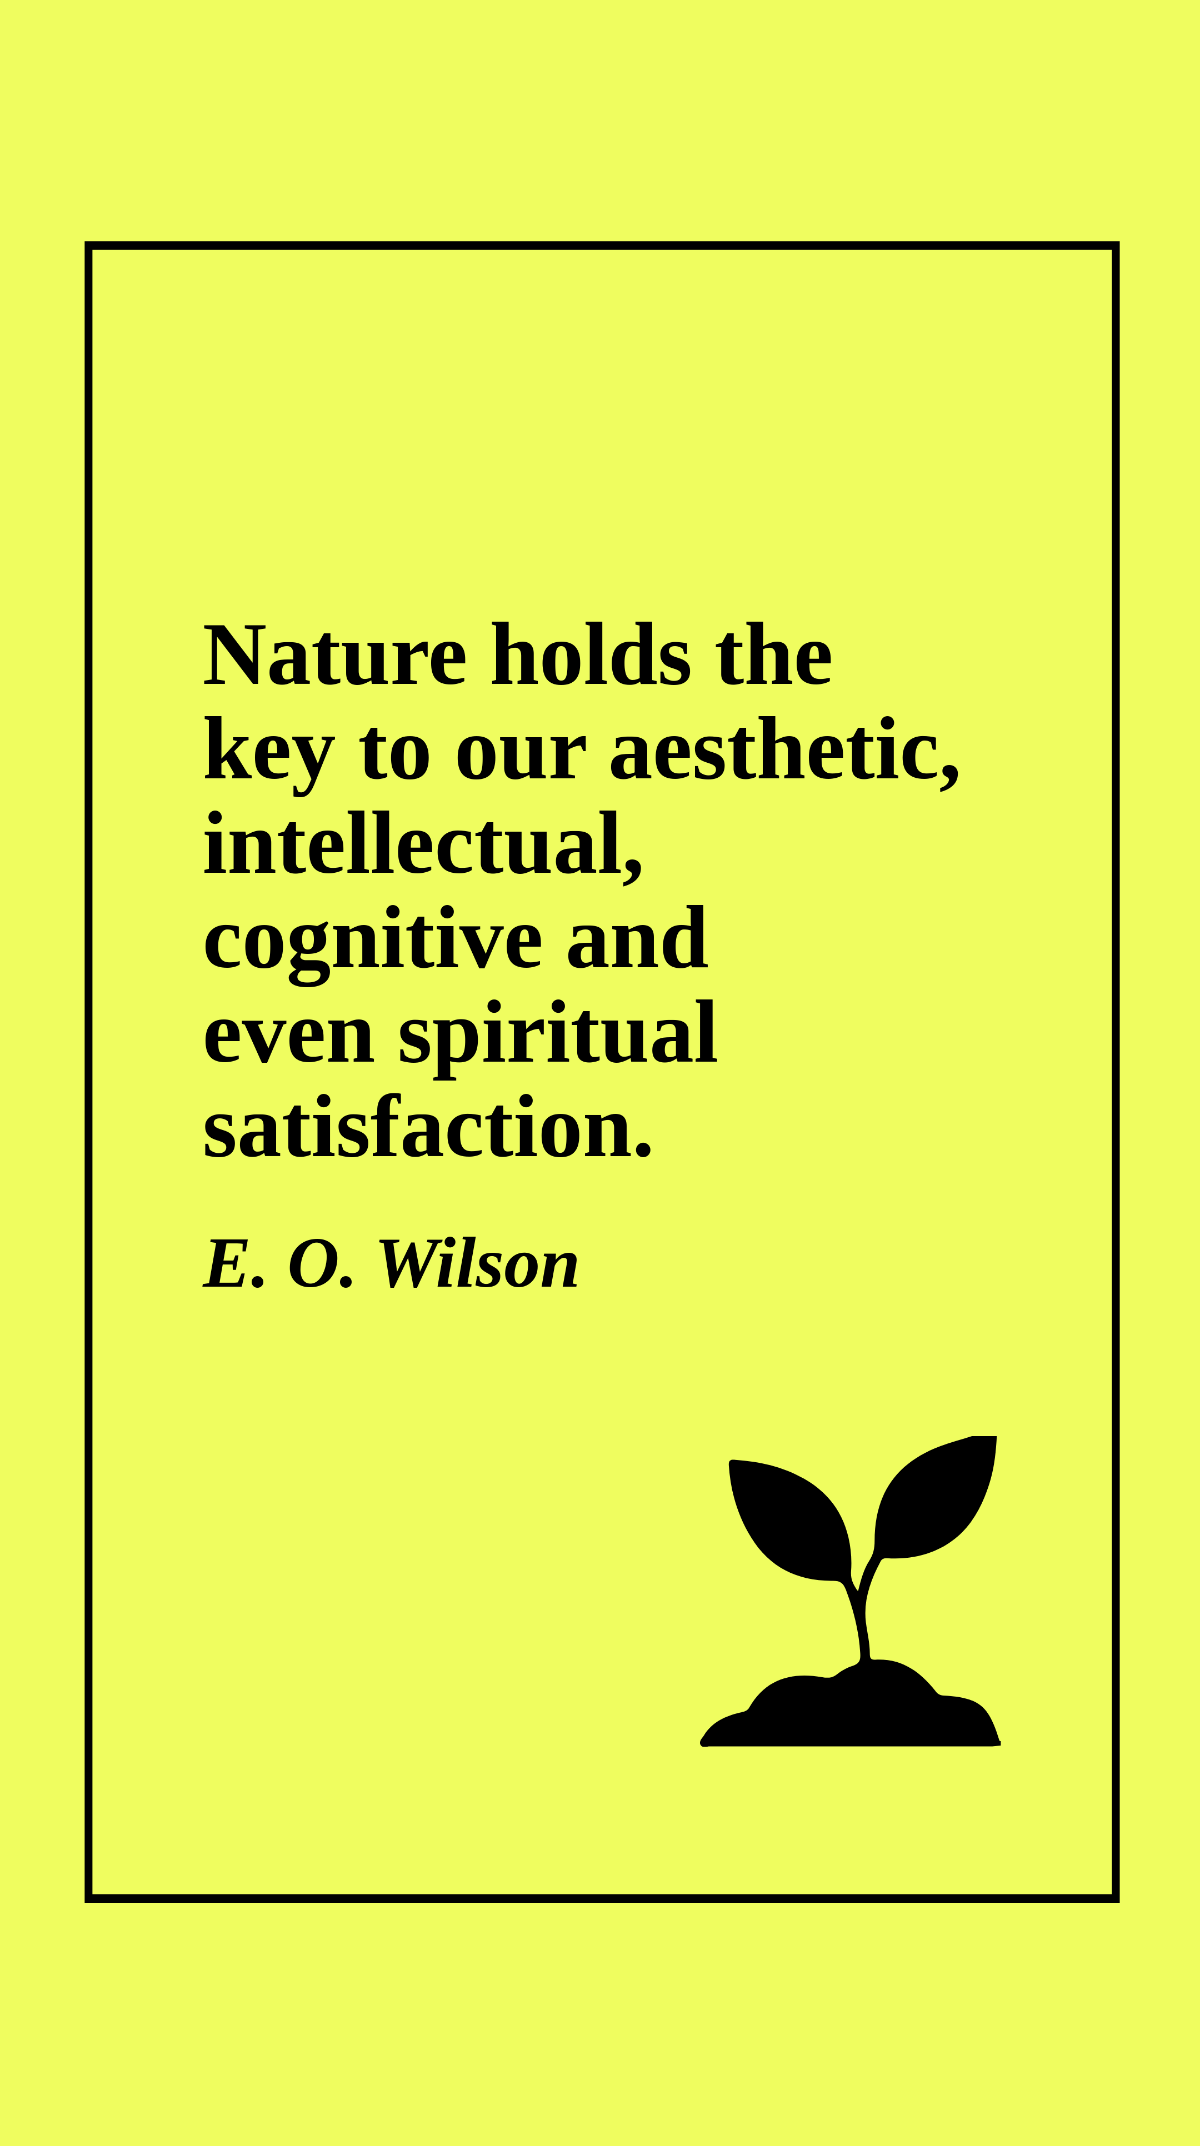 E. O. Wilson - Nature holds the key to our aesthetic, intellectual, cognitive and even spiritual satisfaction. Template